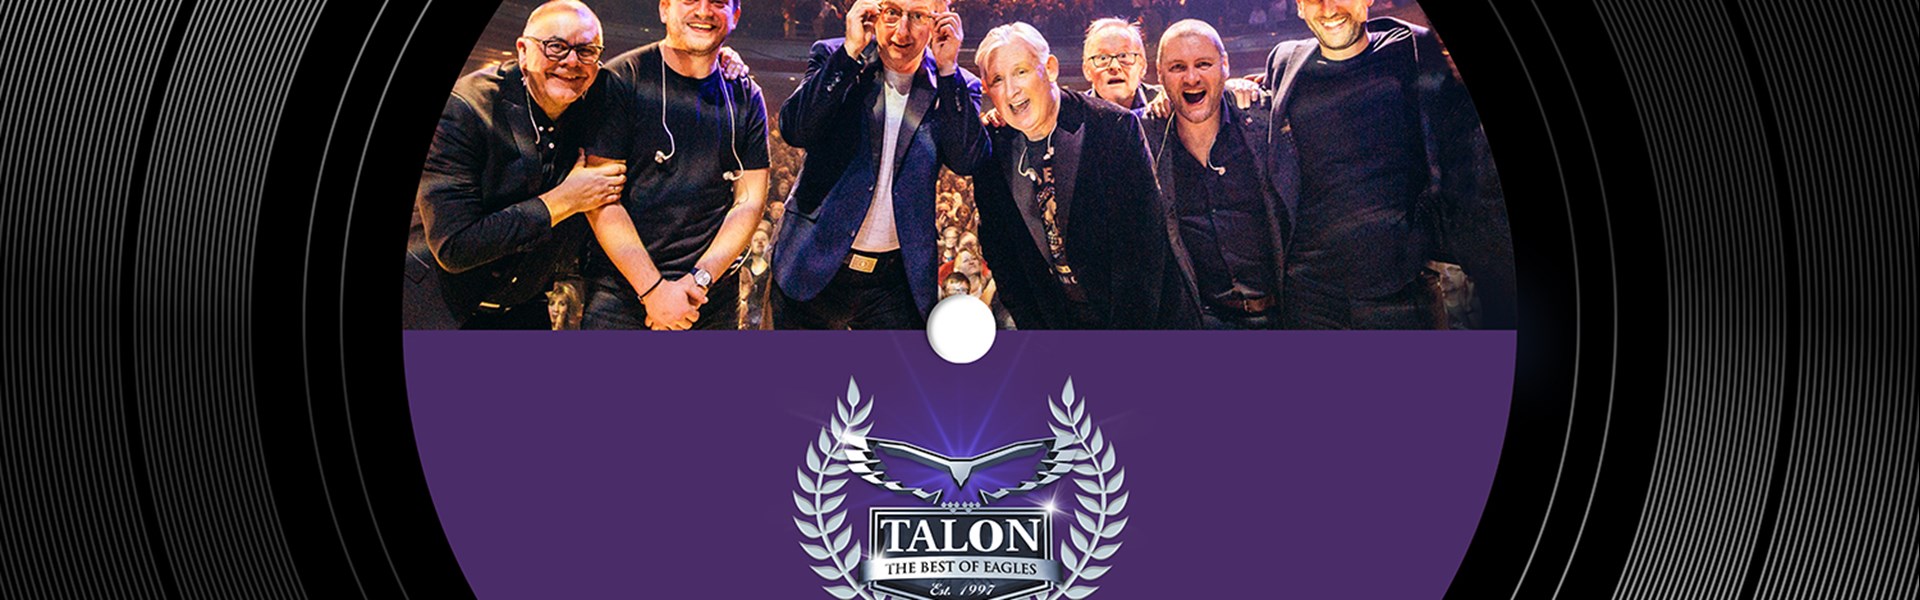 Talon - The Best of Eagles